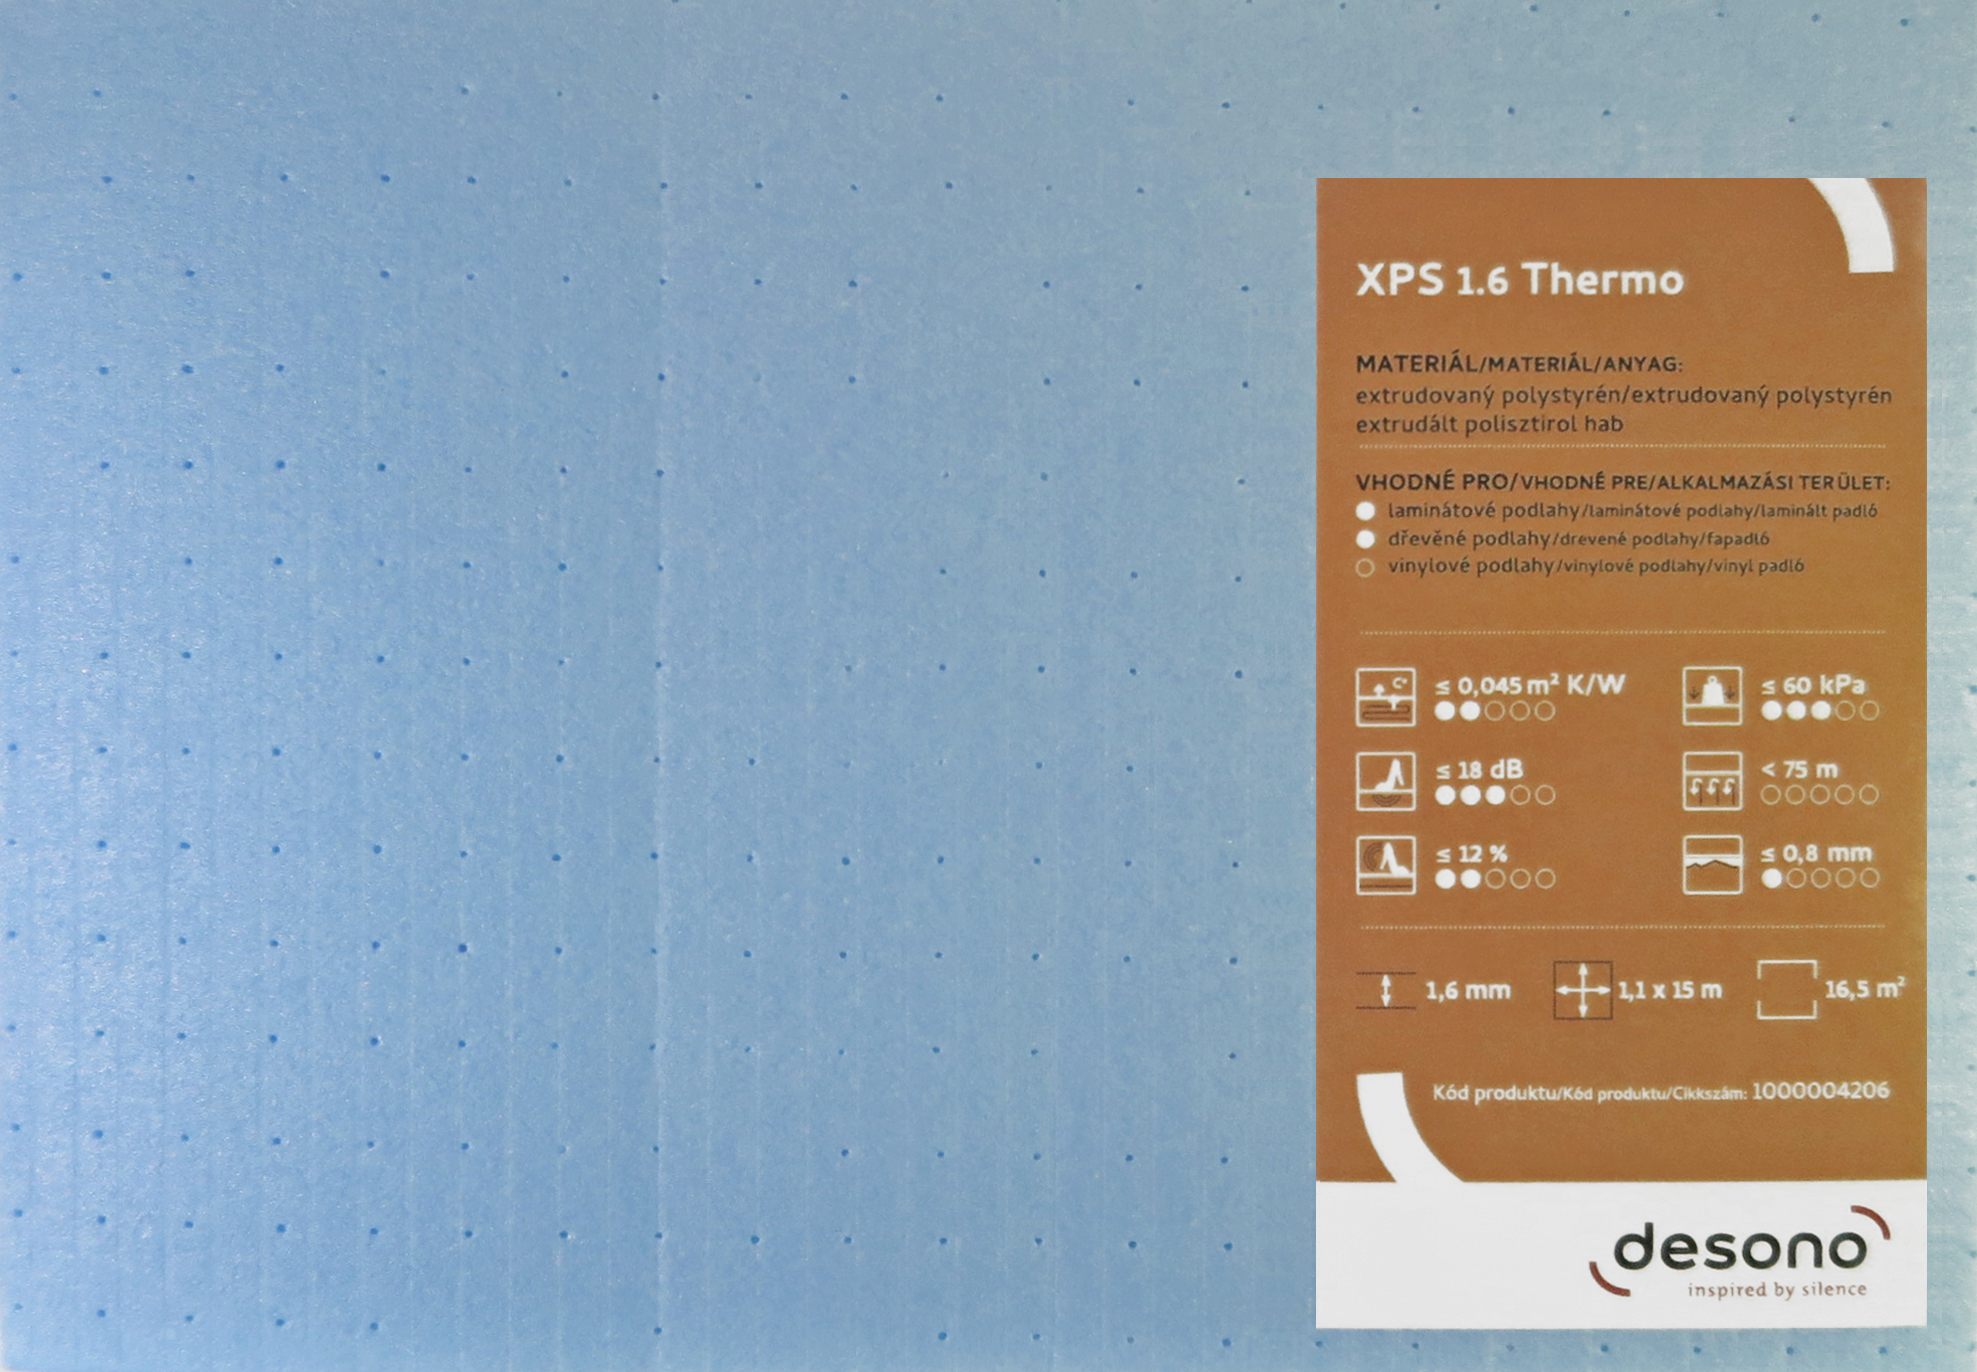 XPS 1.6 Thermo